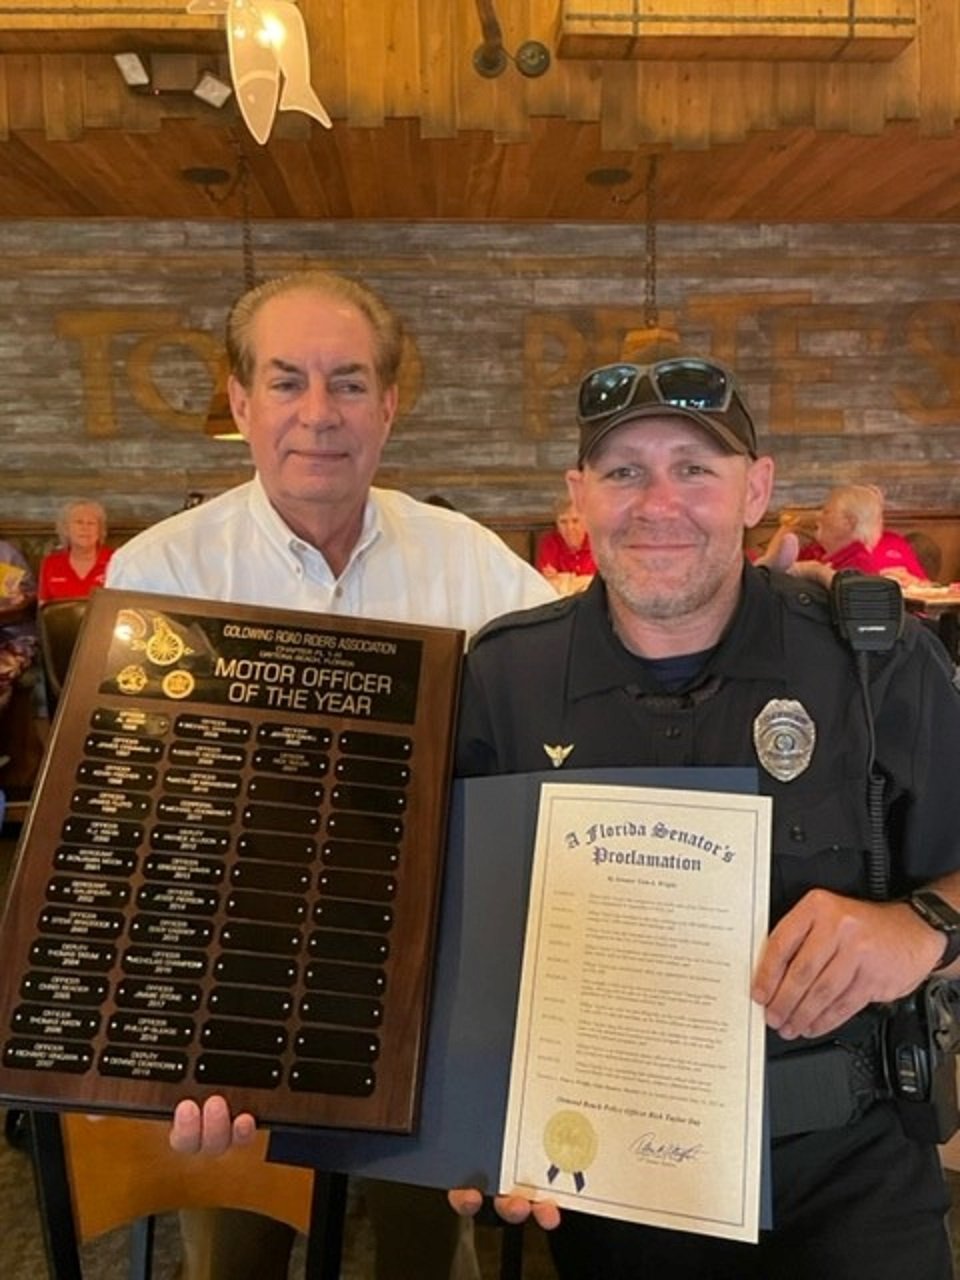 Ormond Beach Officer Rick Taylor Honored with Motor Officer of the Year Award